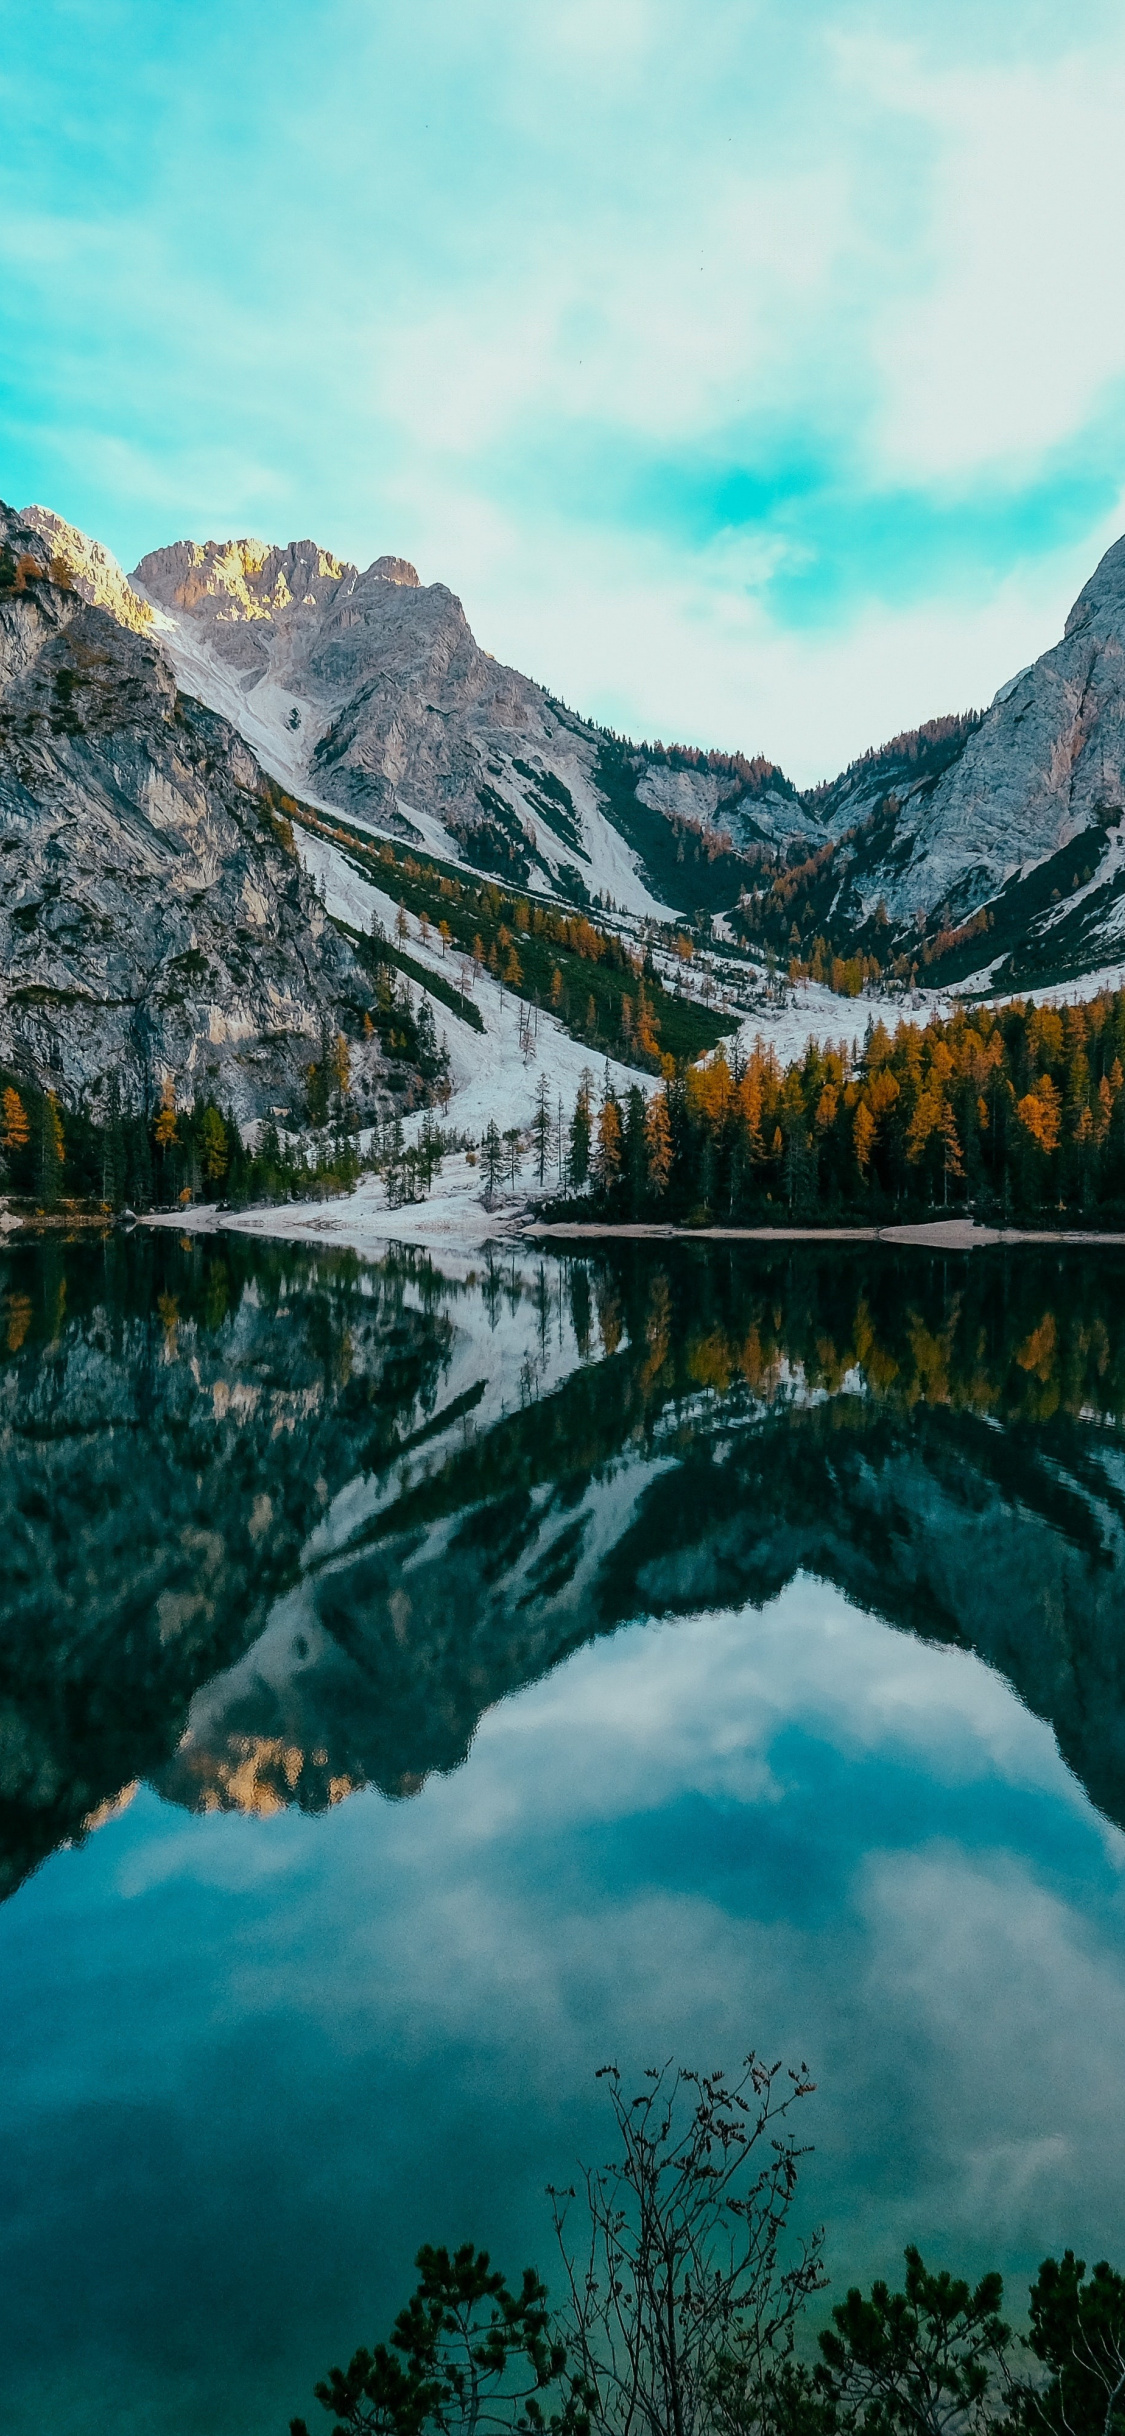 Download 1125x2436 wallpapers lake, nature, mountains, reflections